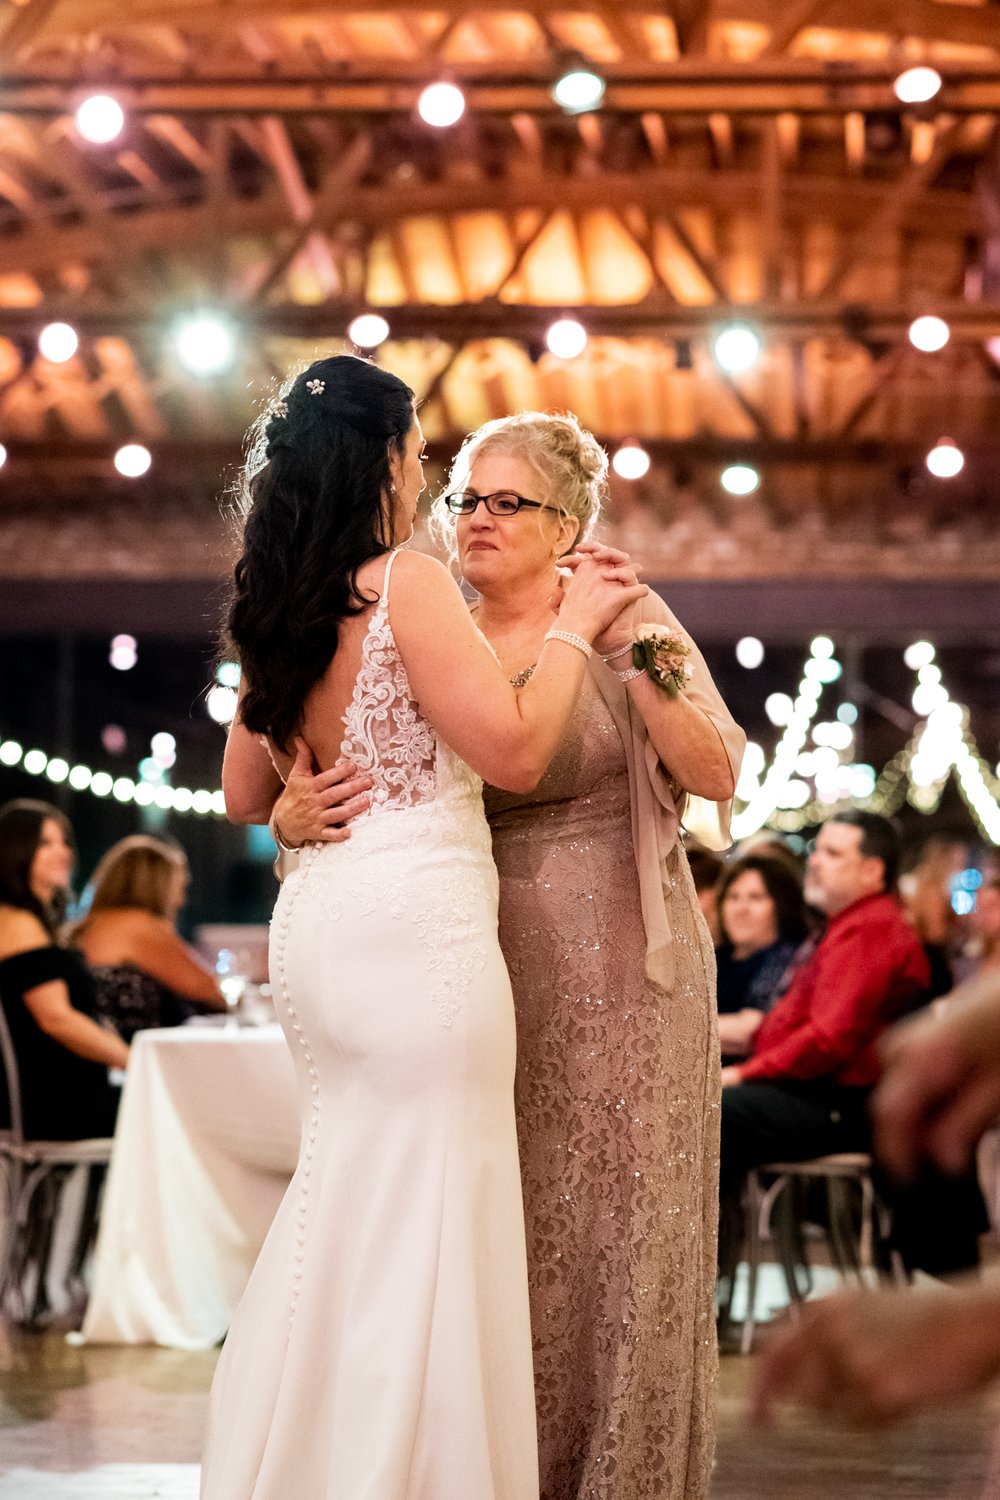 Alex Maldonado Photography | Chicago Wedding Photographer | mother daughter dance at rockwell on the river recepion space.jpg